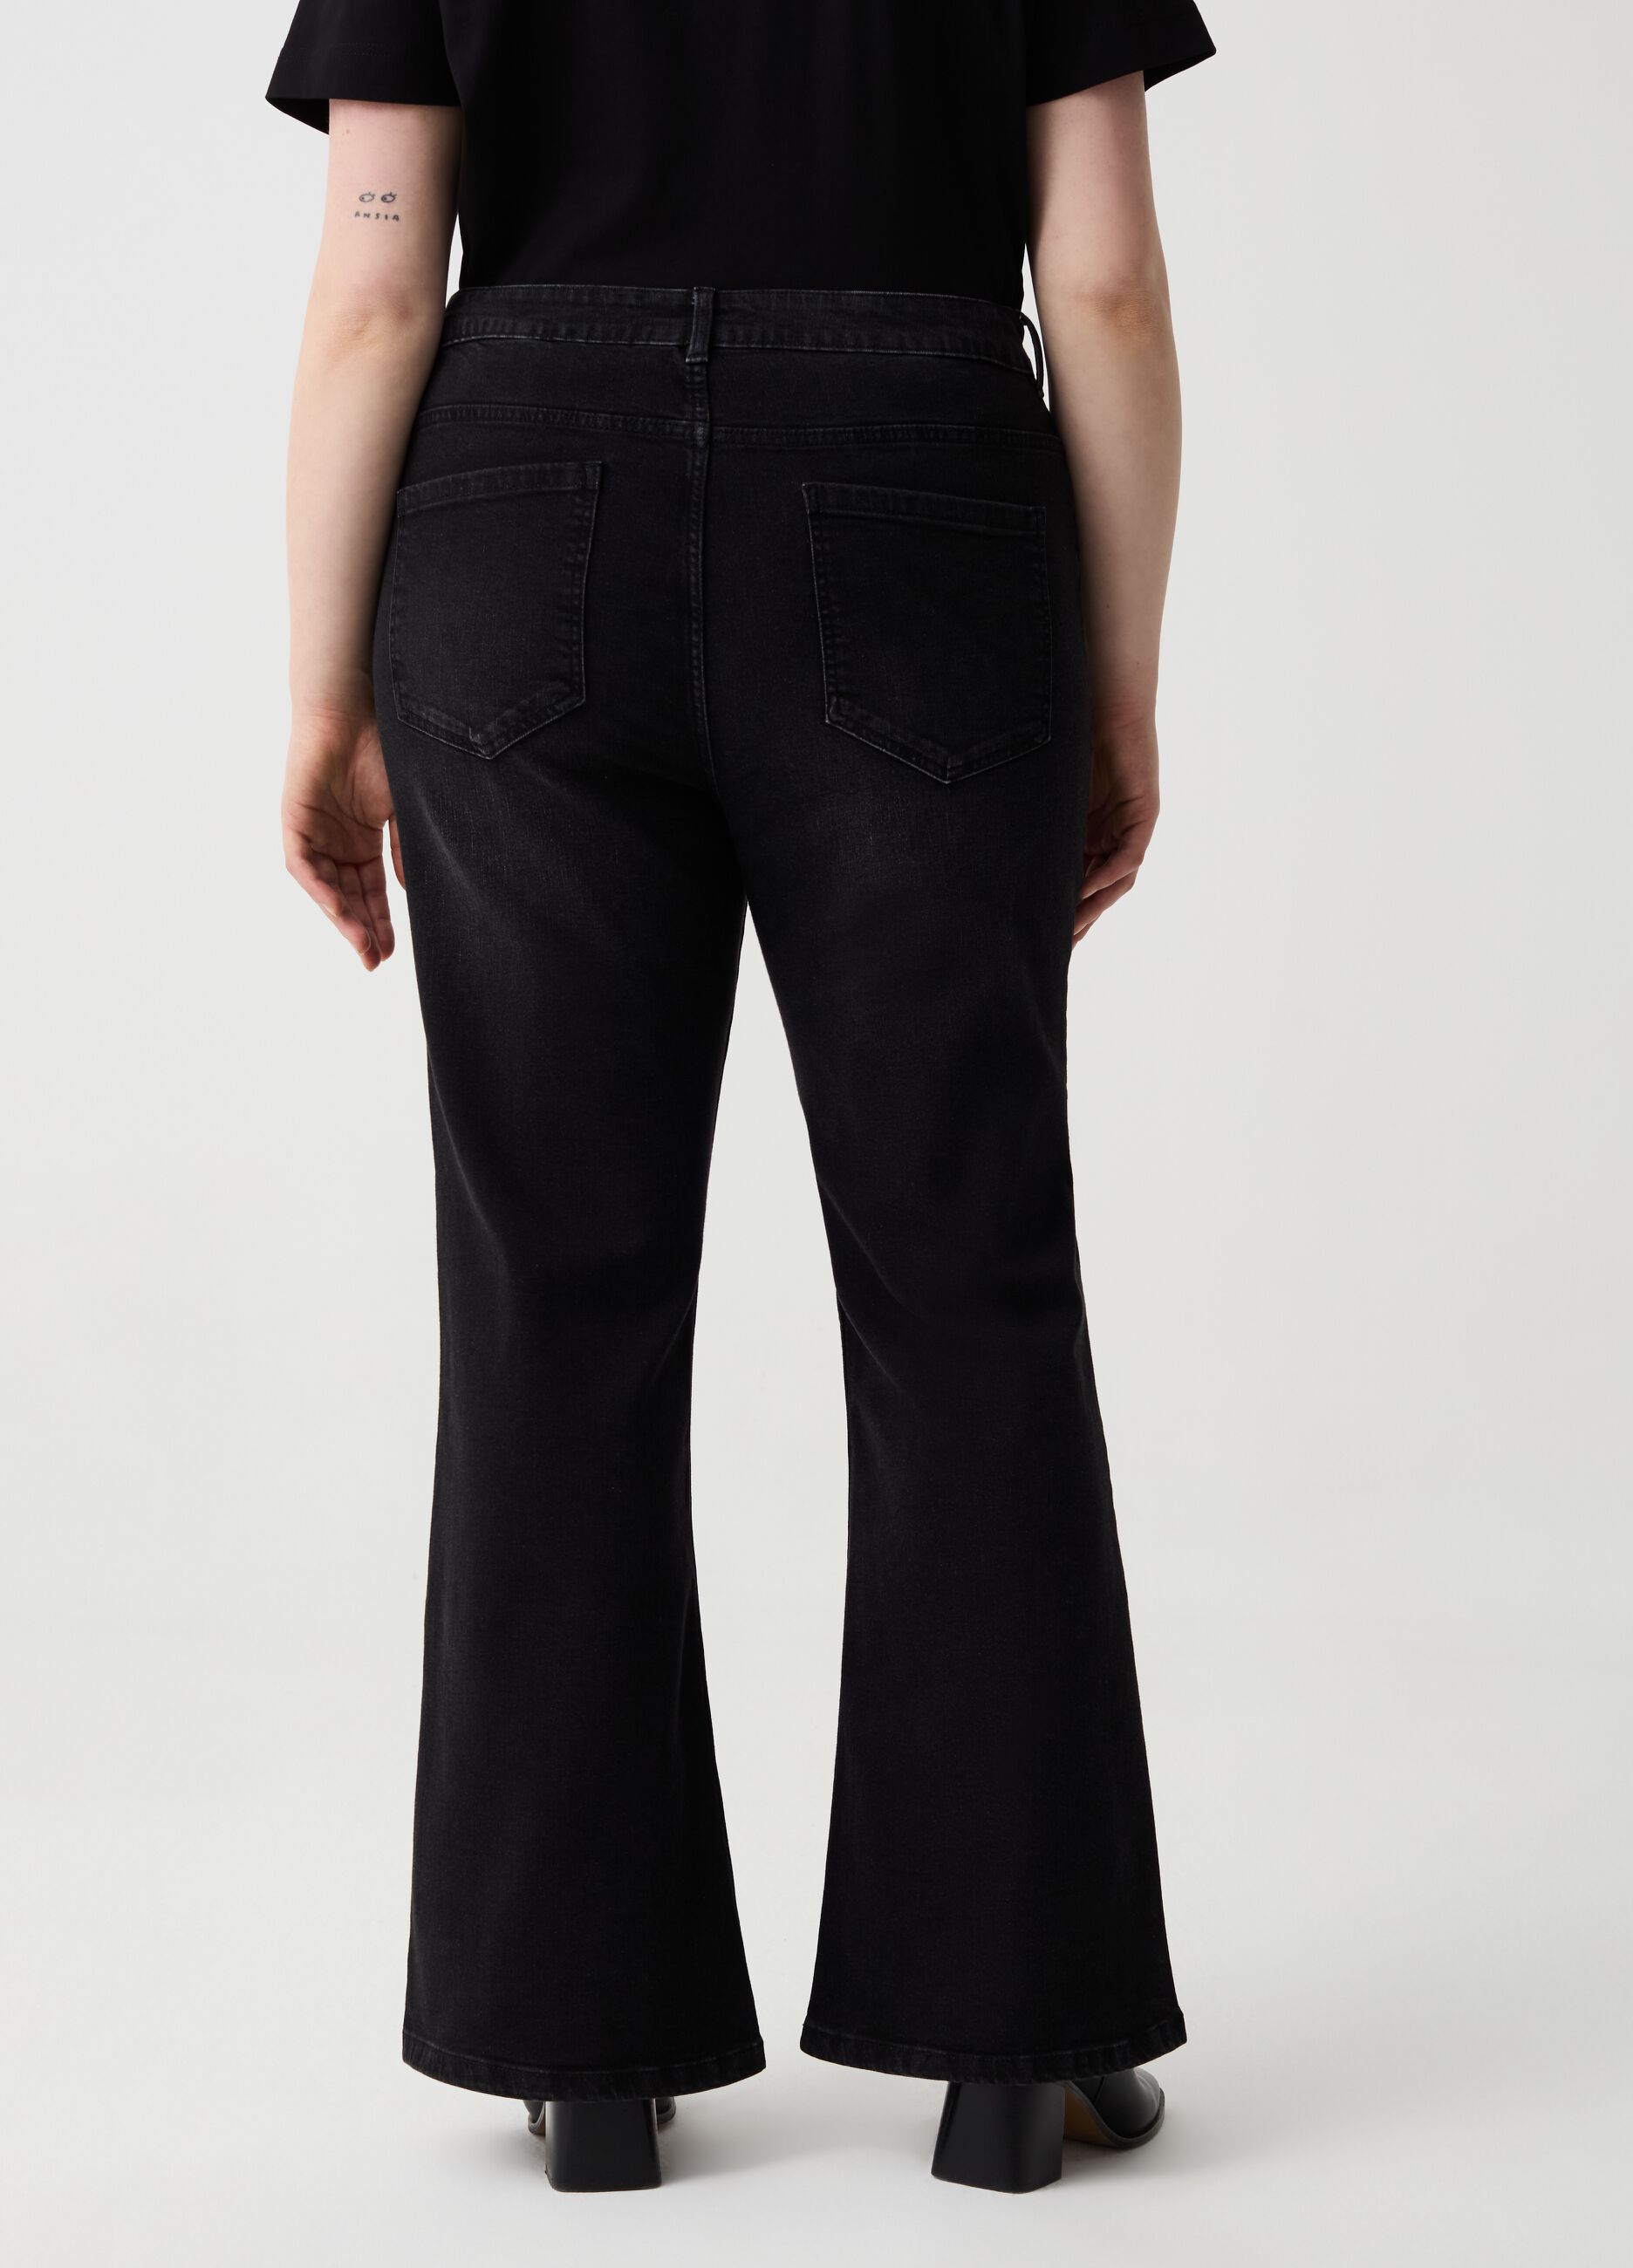 Jeans bell bottom skinny fit Curvy